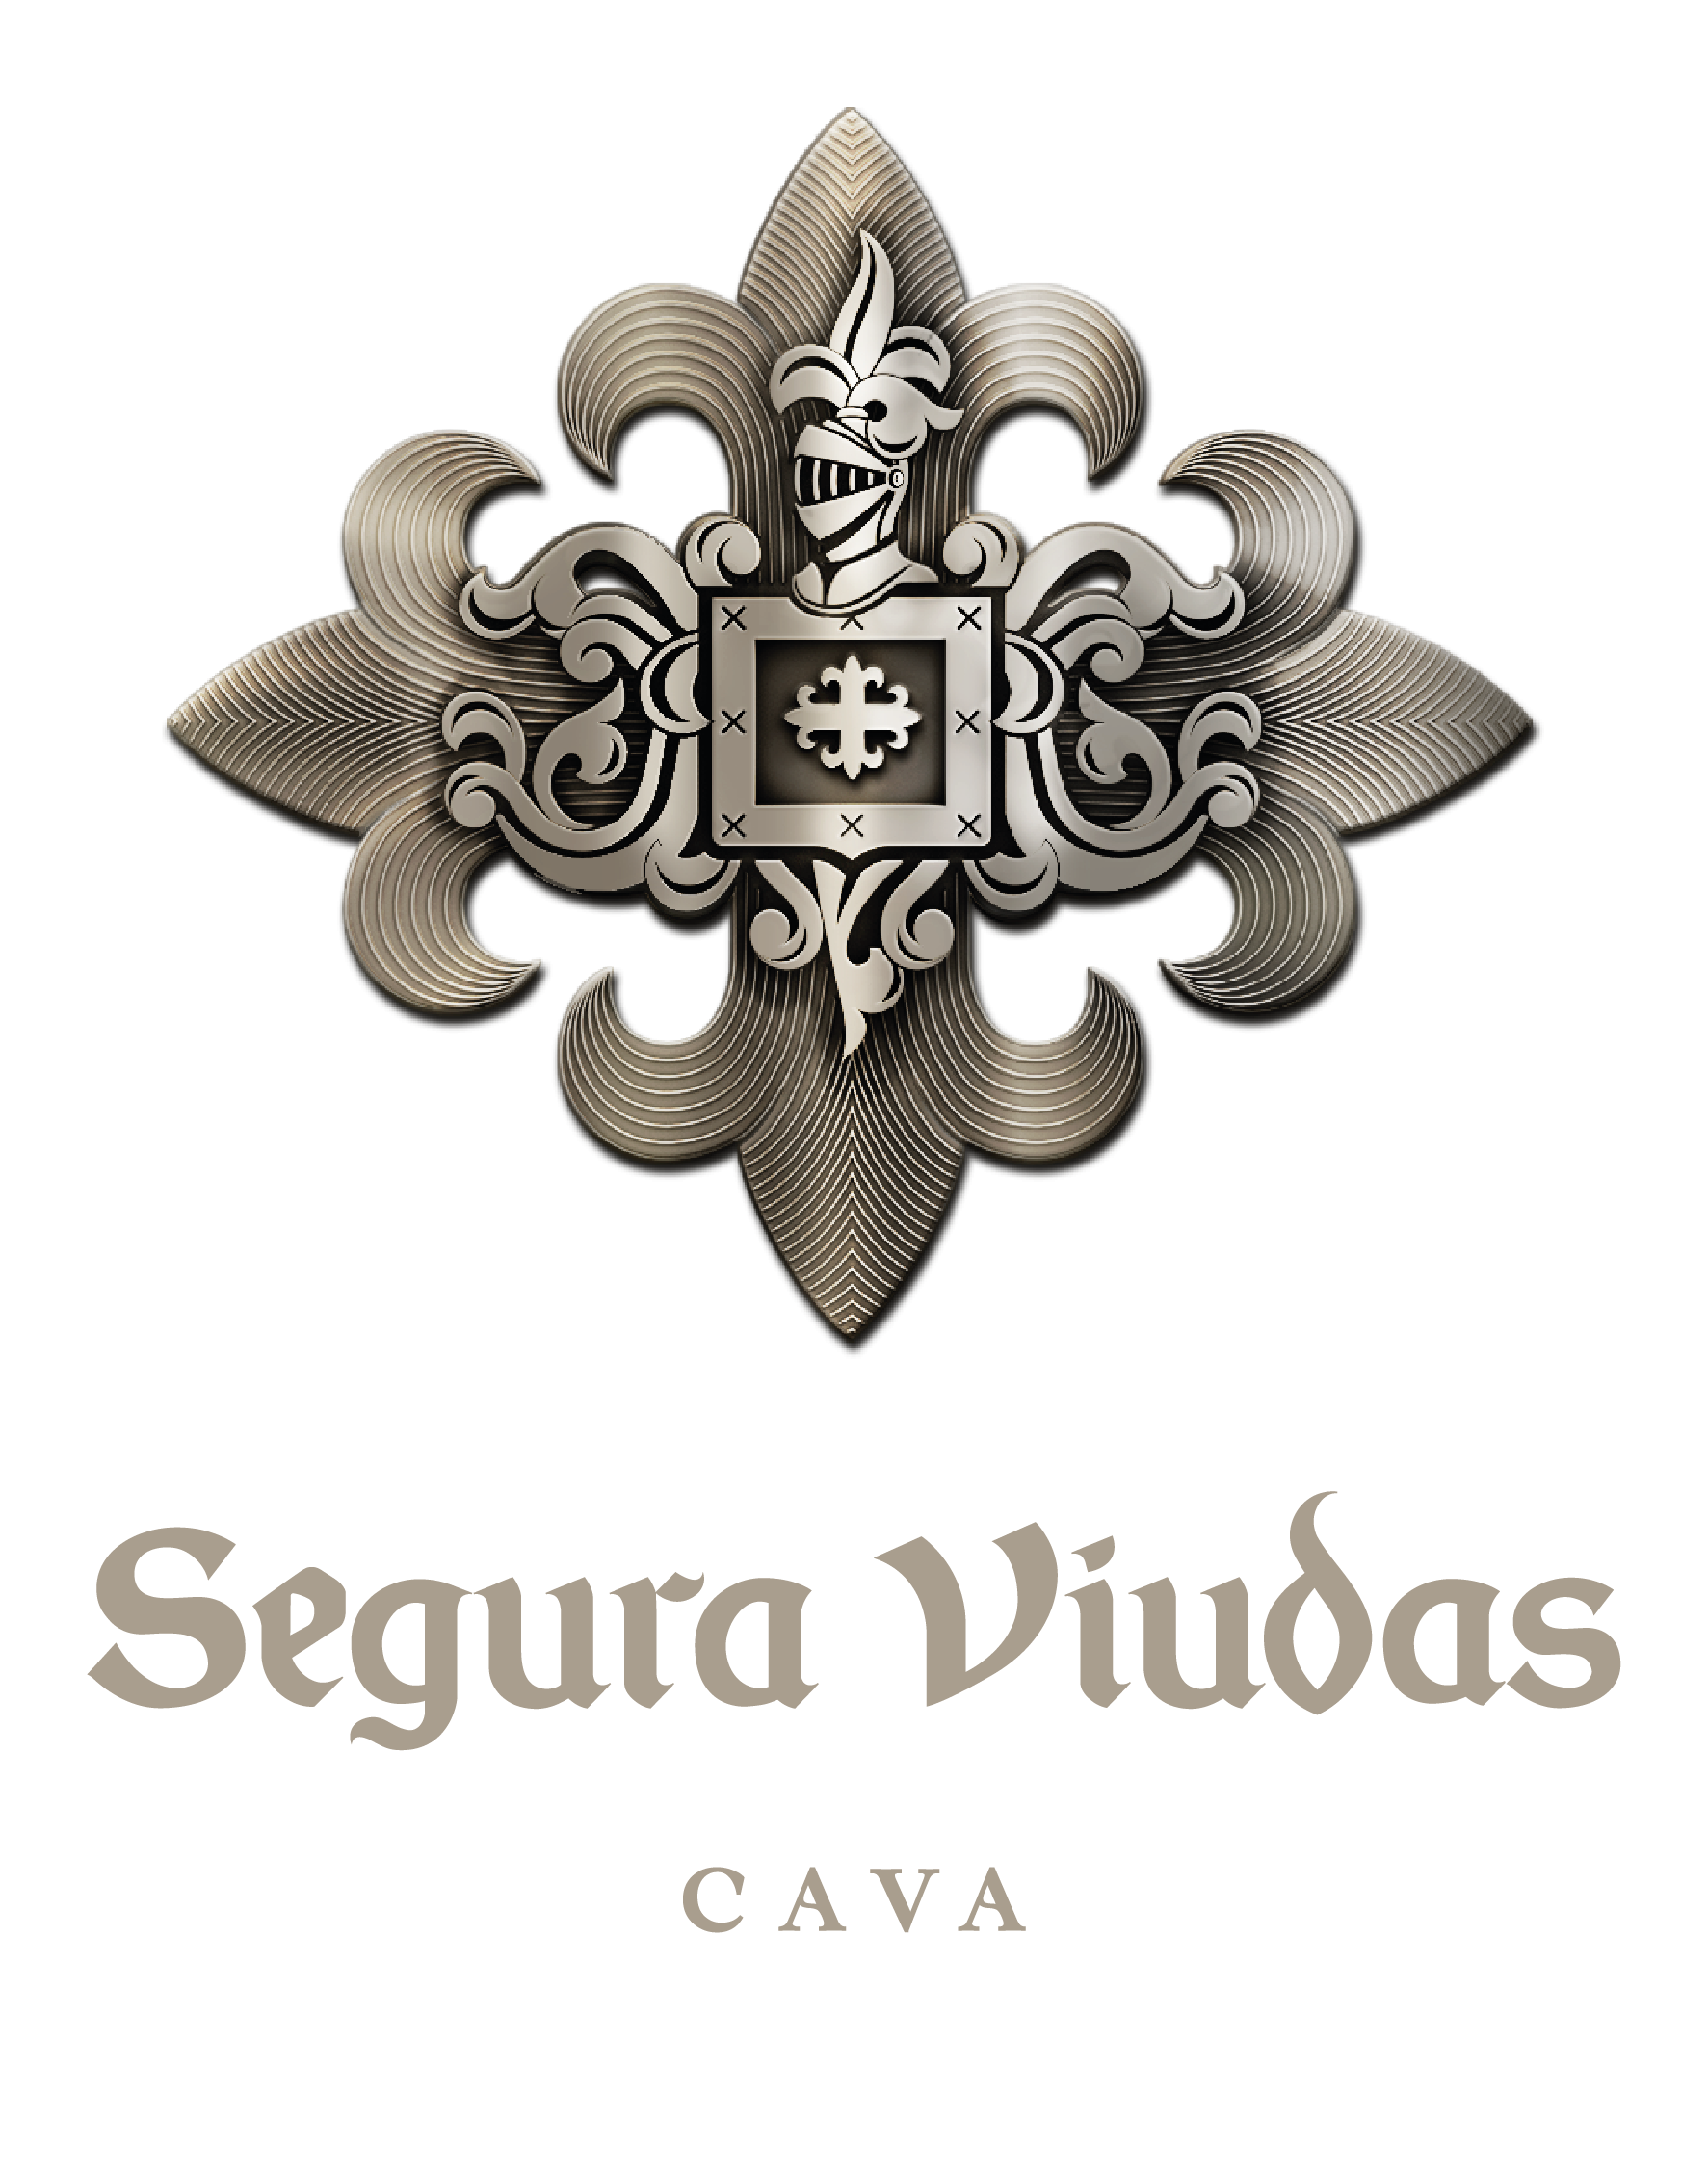 SV_Crest with SV Cava.png